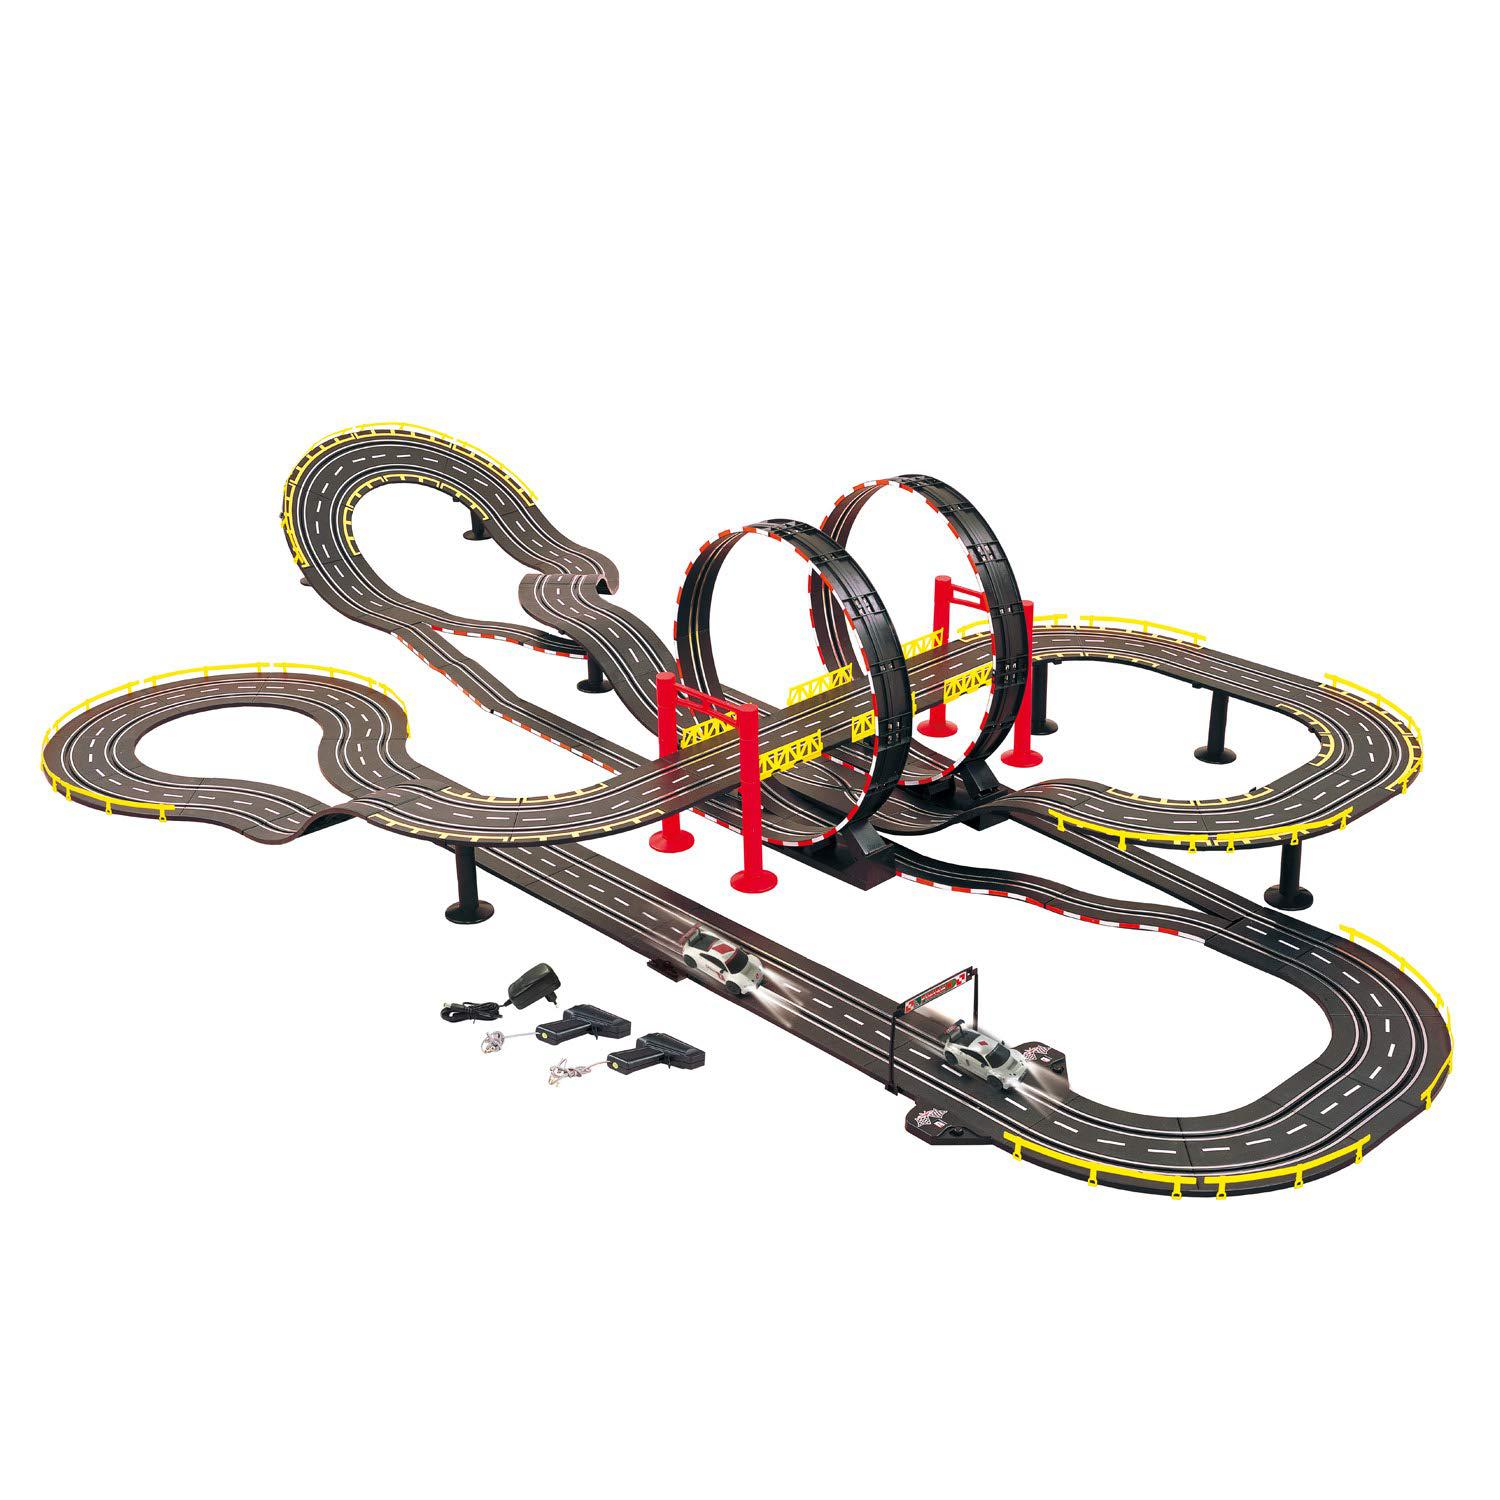 golden bright big loop chaser road racing set- electric powered